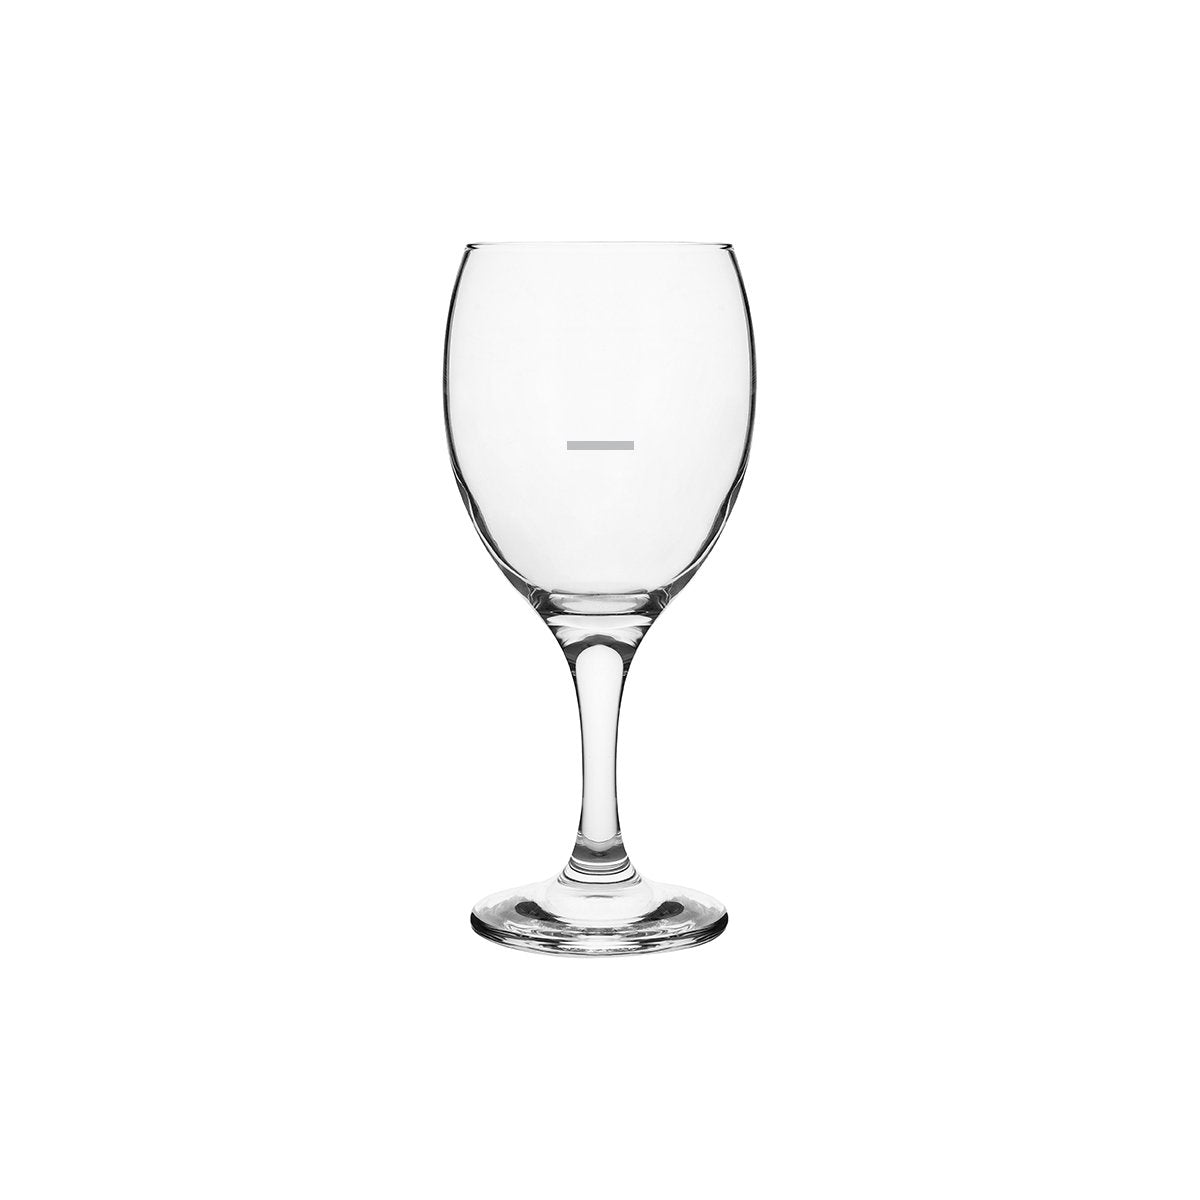 Imperial Wine - With Pour Line at 150ml, 340ml, 83mm, 180mm